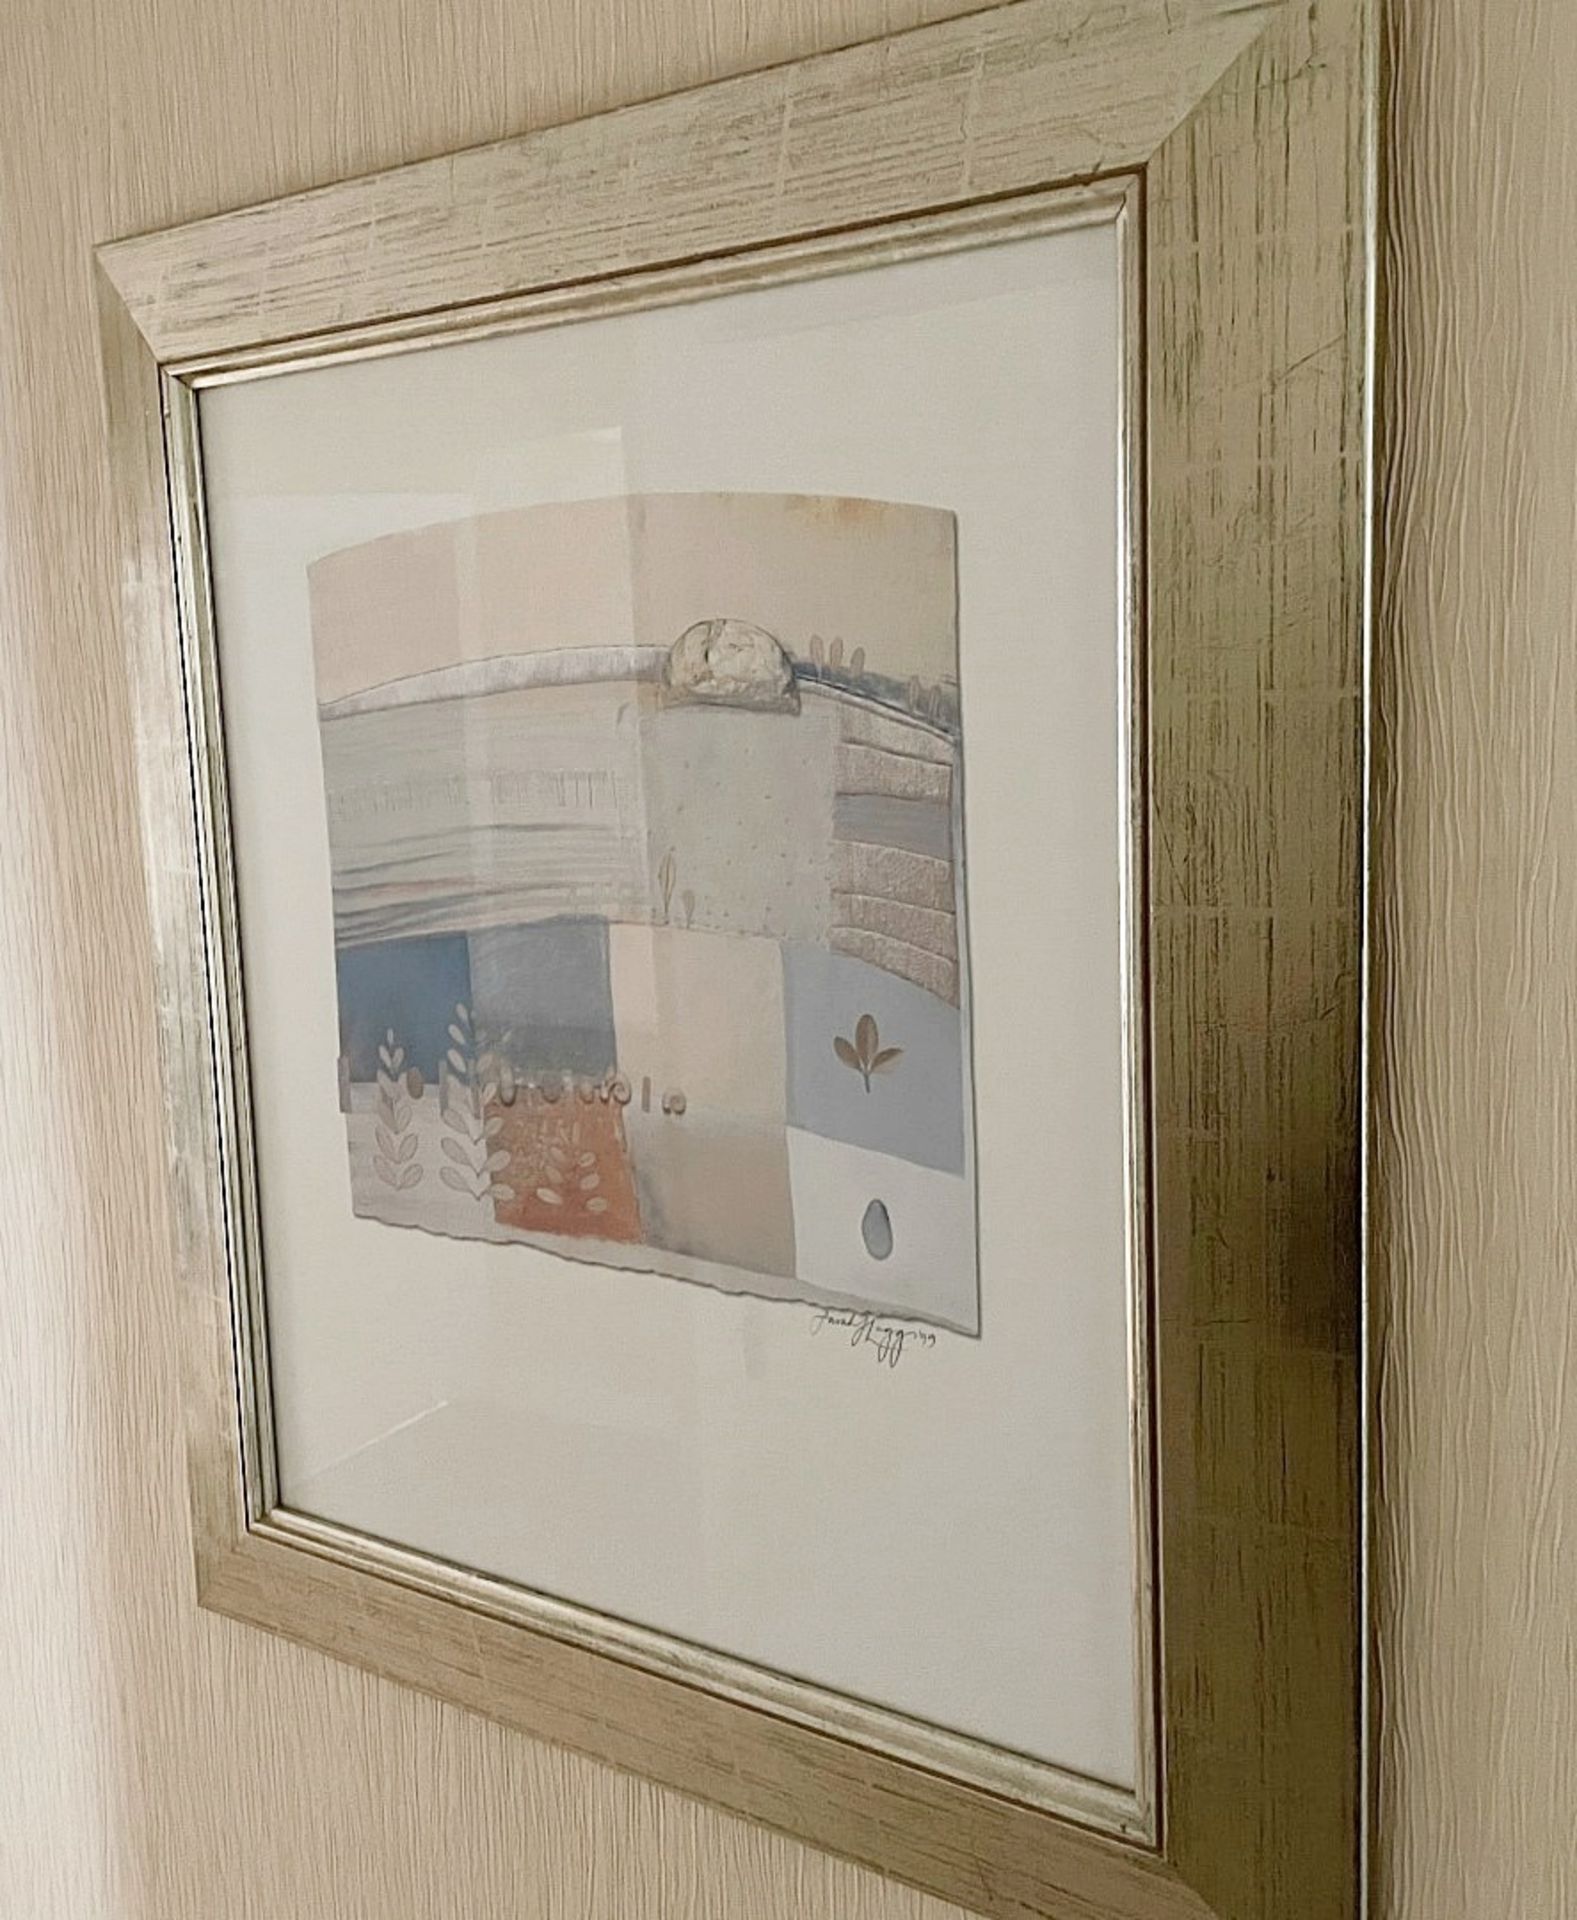 1 x Framed Fine Art Print - Dimensions: 66.5 x H76cm - From An Exclusive Property In Leeds - No - Image 2 of 3